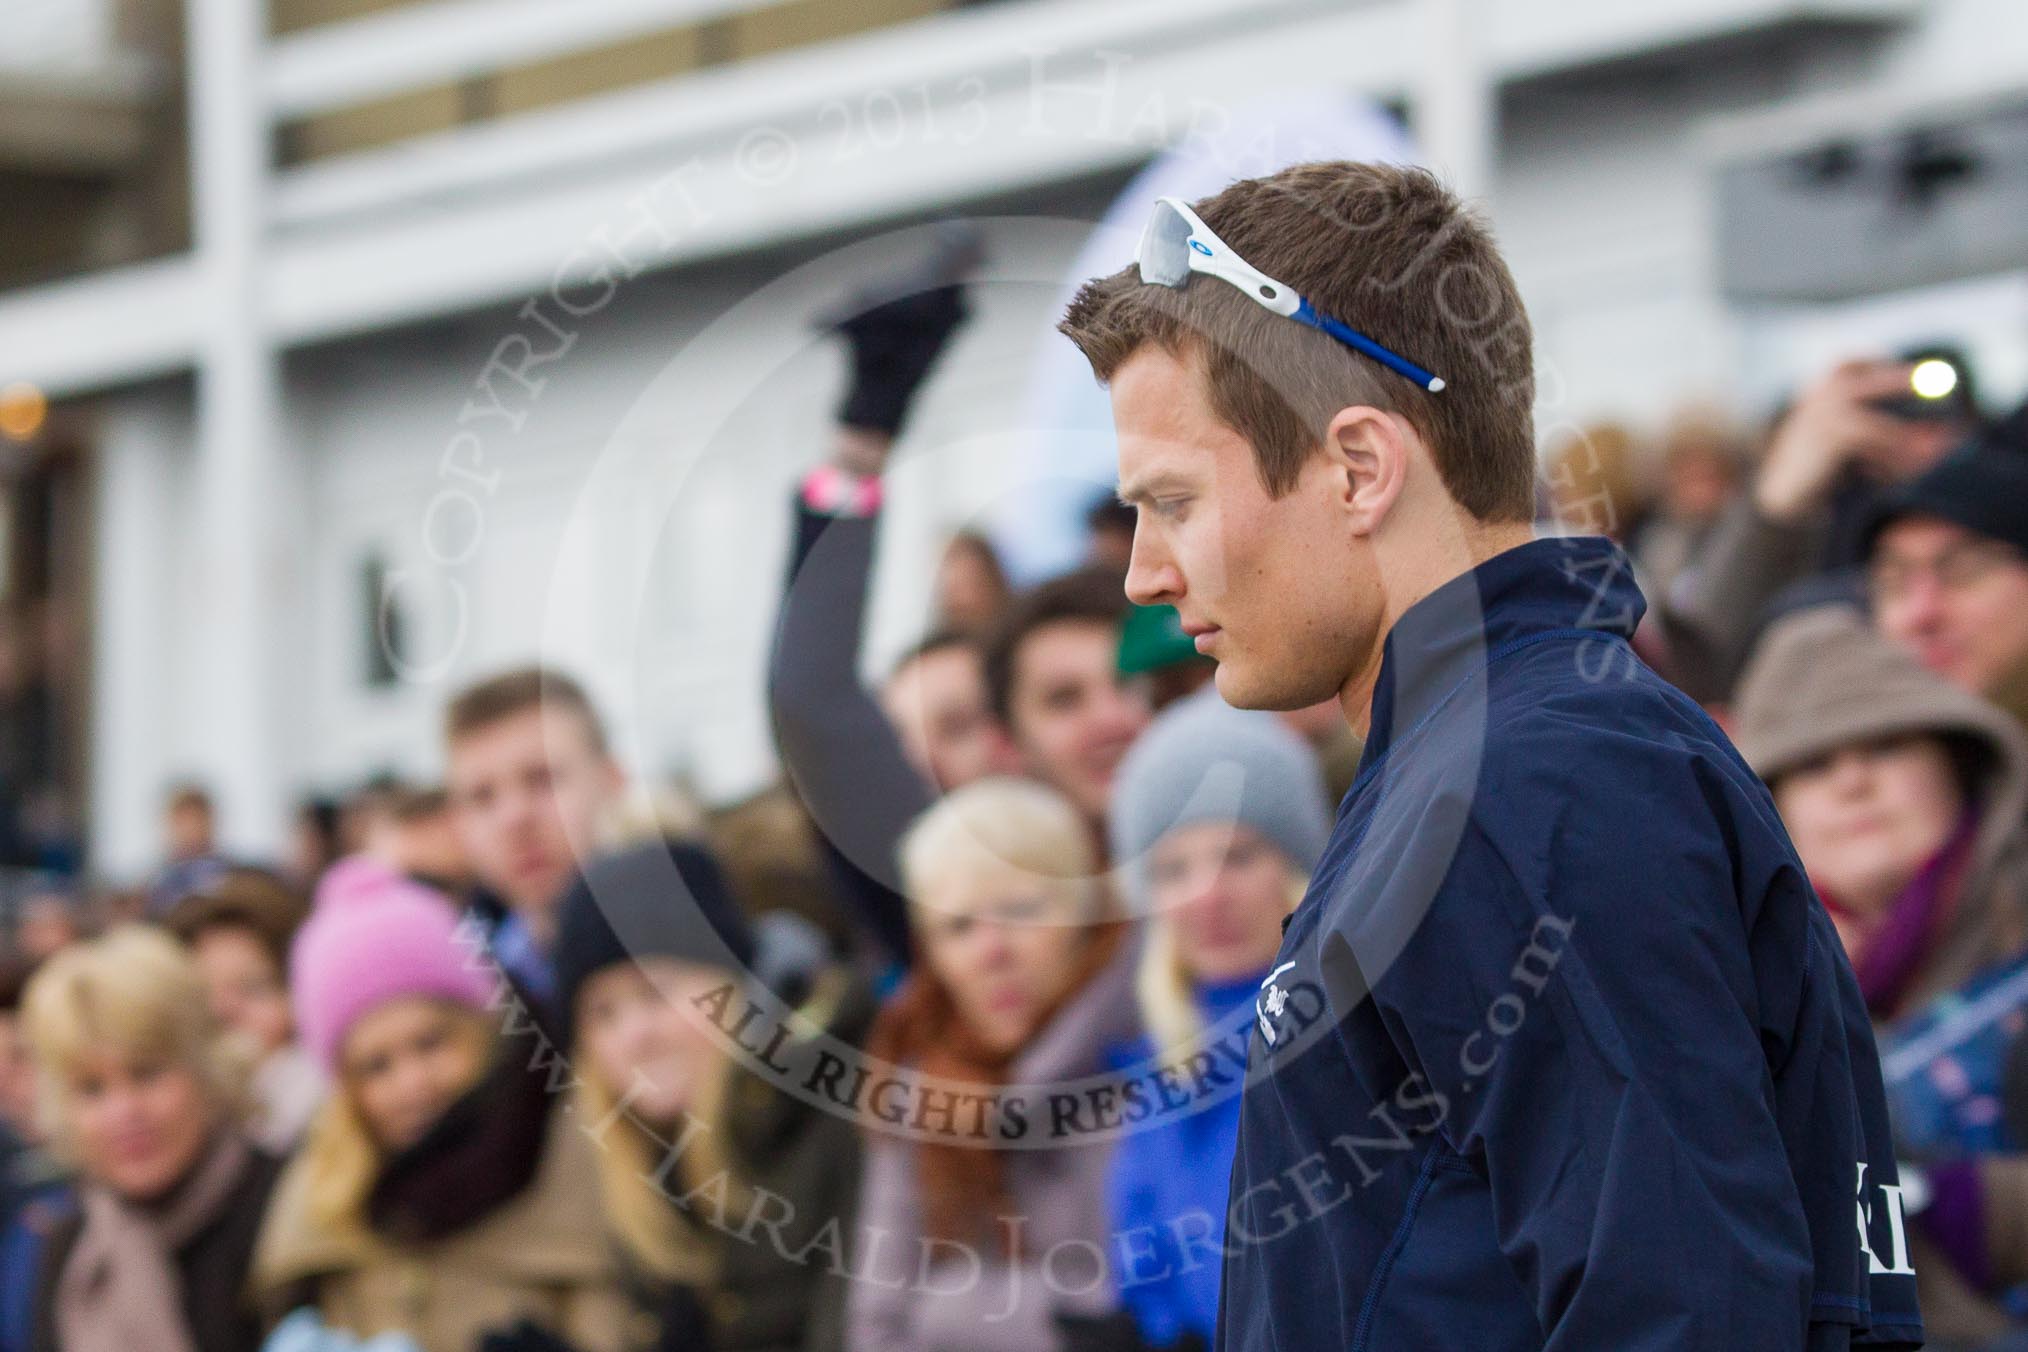 The Boat Race 2013.
Putney,
London SW15,

United Kingdom,
on 31 March 2013 at 15:43, image #154